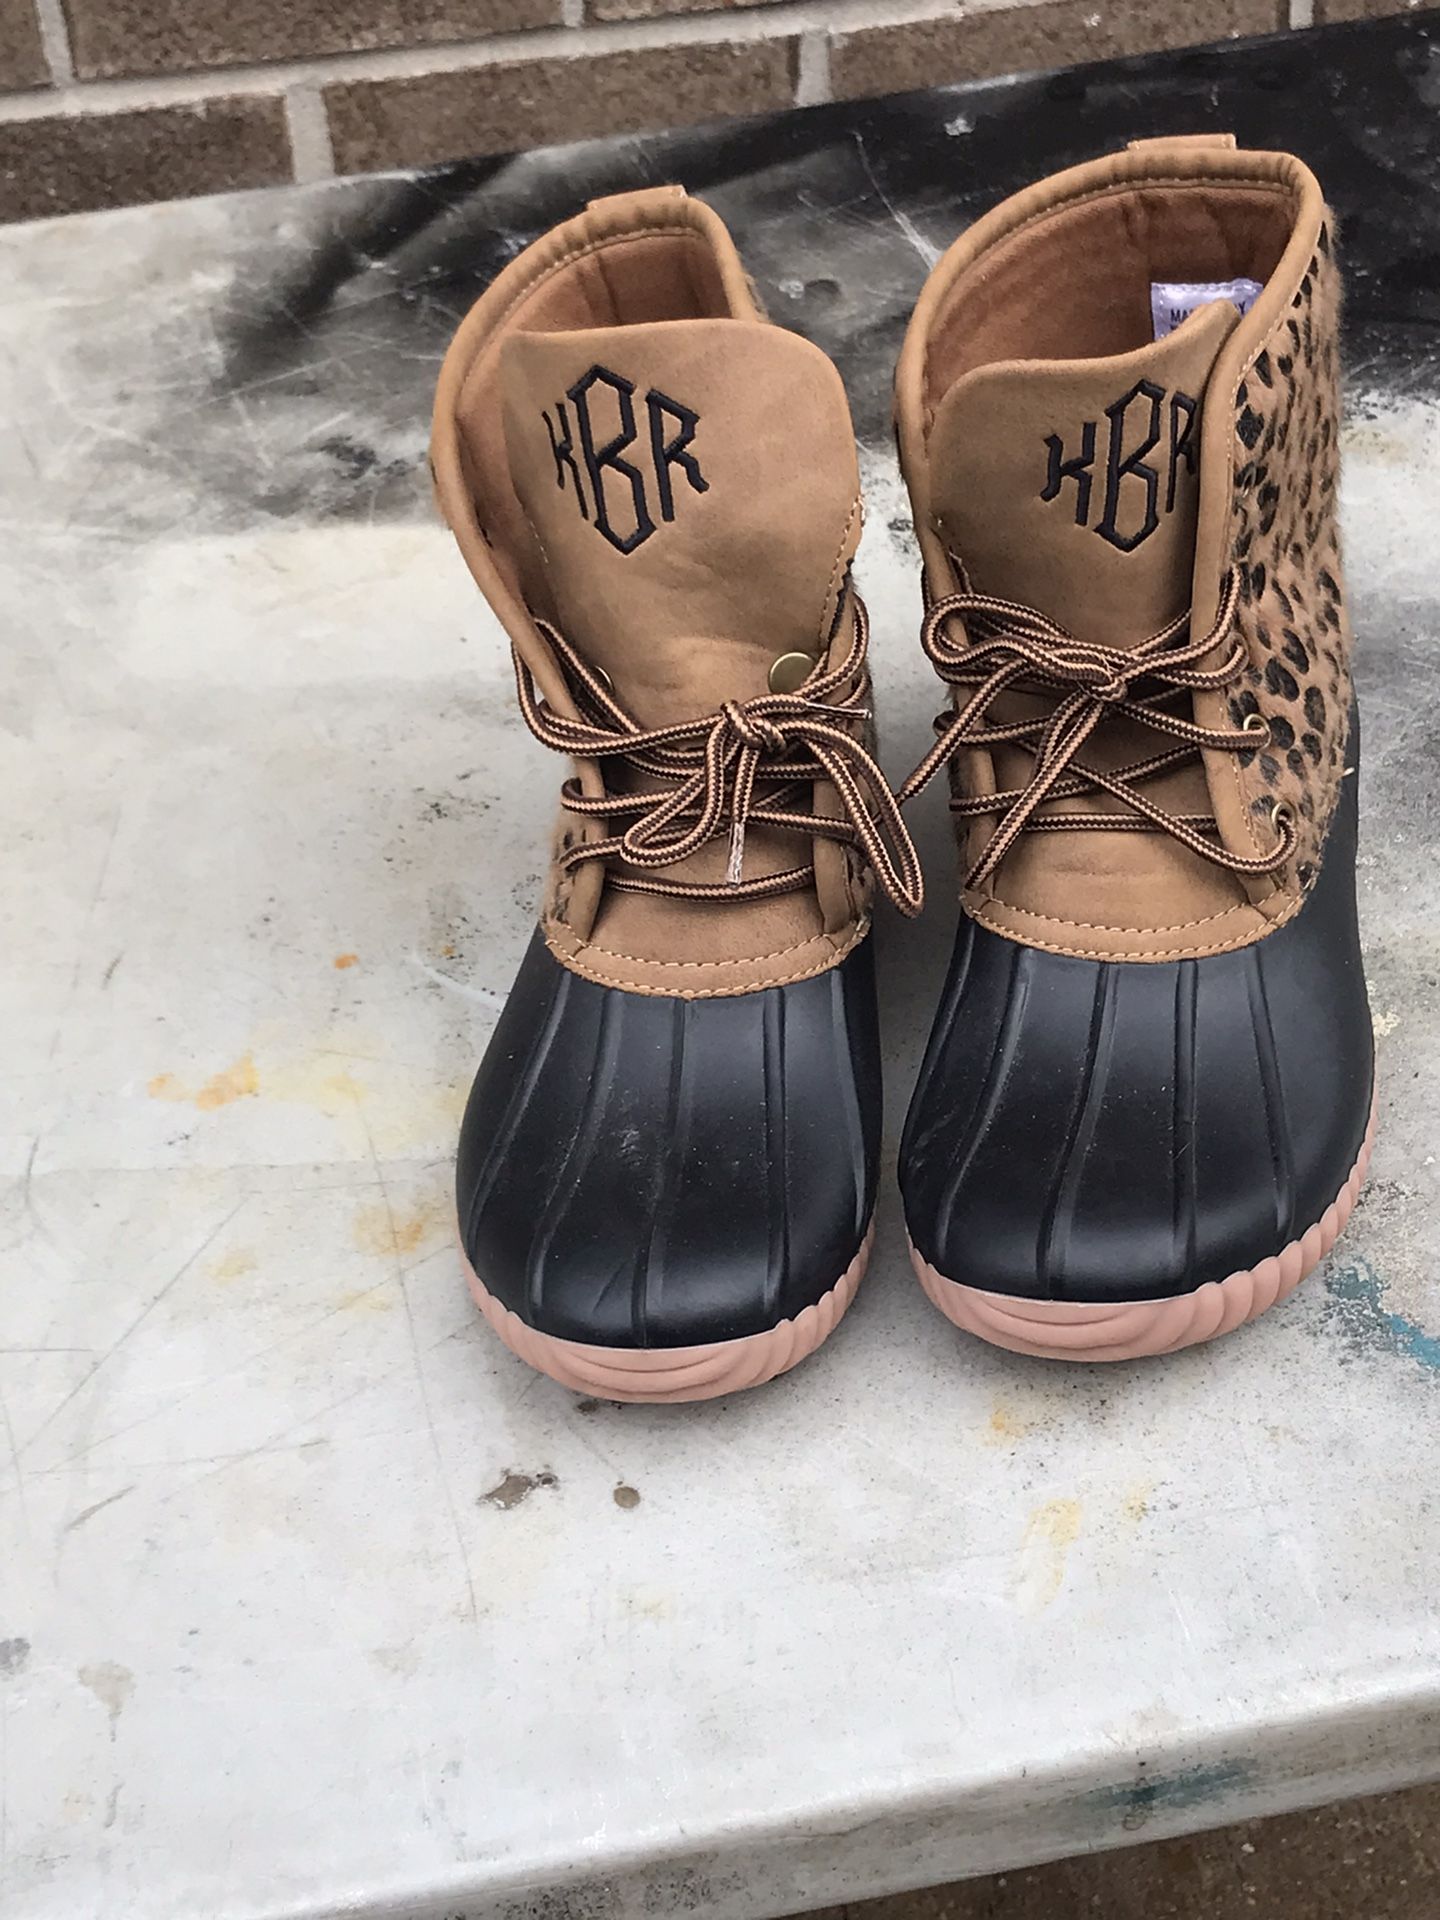 Marley Lilly KBR Water 💦 Proof Booties Size 8